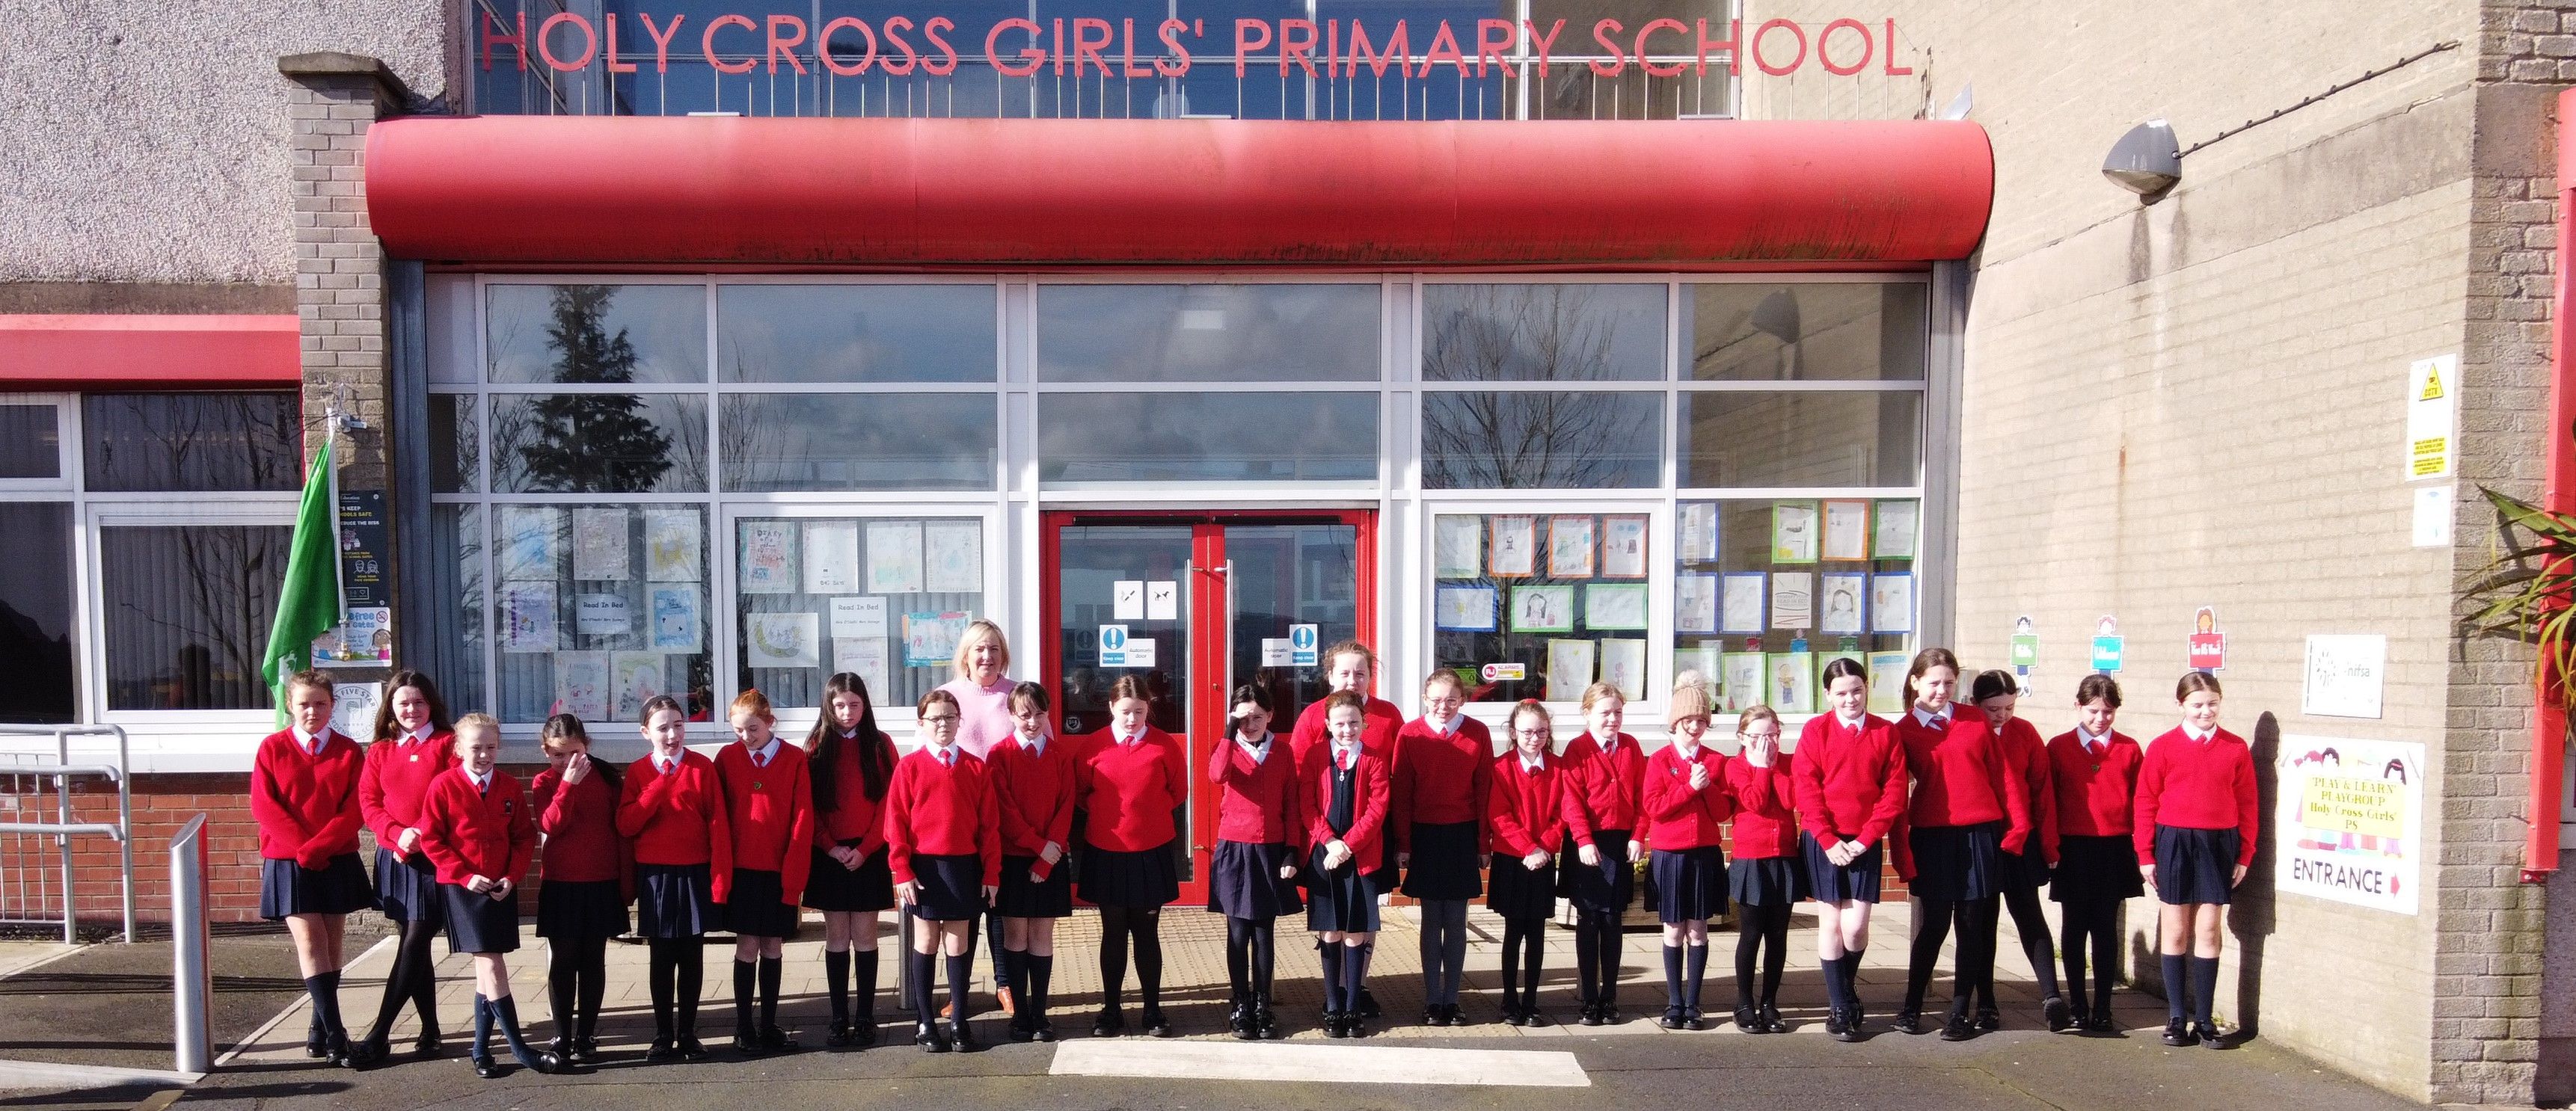 The P7 class of Holy Cross Girls School, Belfast who were partnered with the 5th class of Daingean NS in Offaly  throughout this exciting project